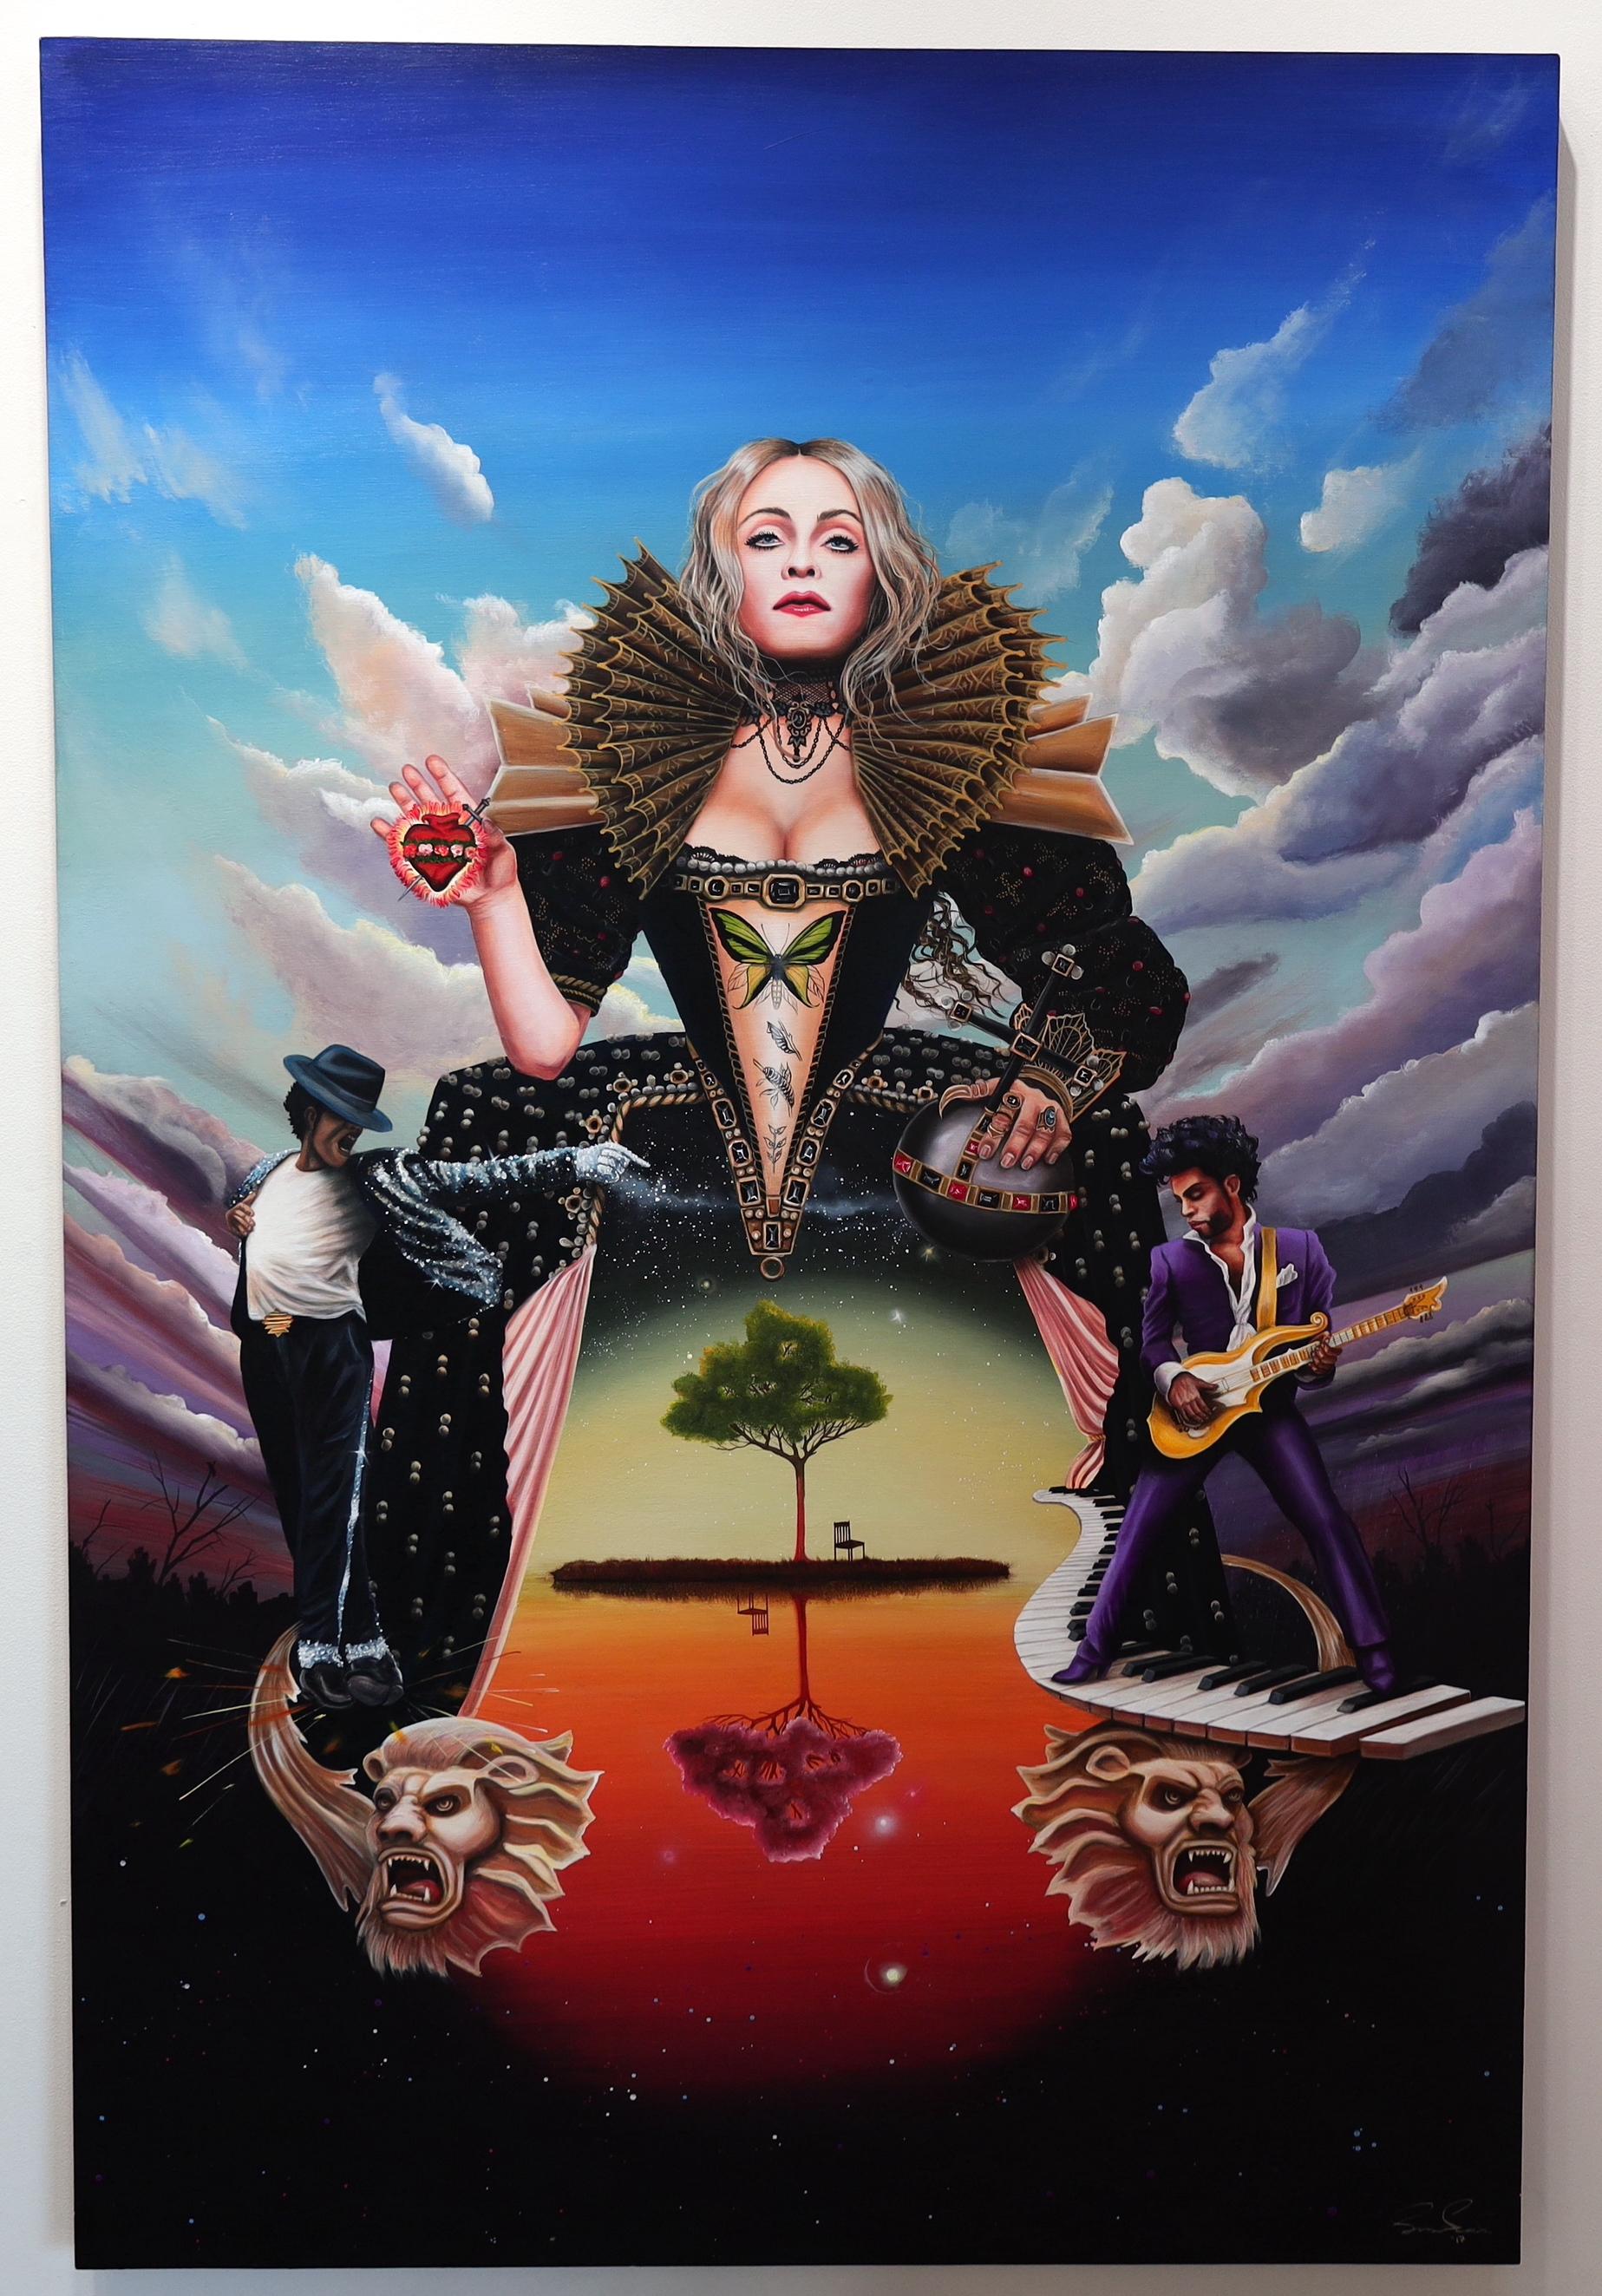 The Queen, The King, and The Prince - Contemporary Painting by Luis Sanchez